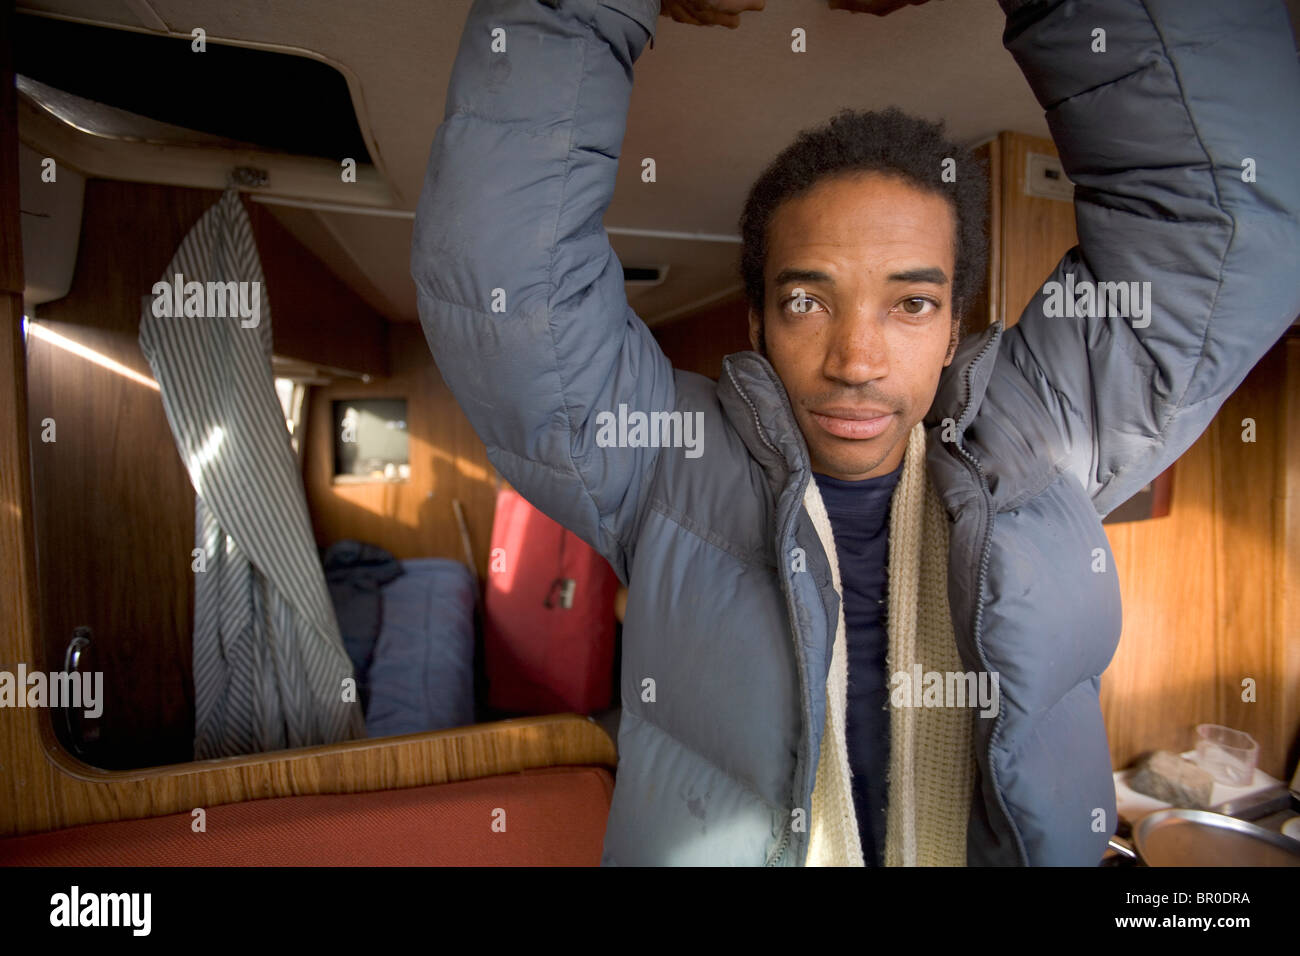 Portrait of black male with hands above his head in a trailer. Stock Photo